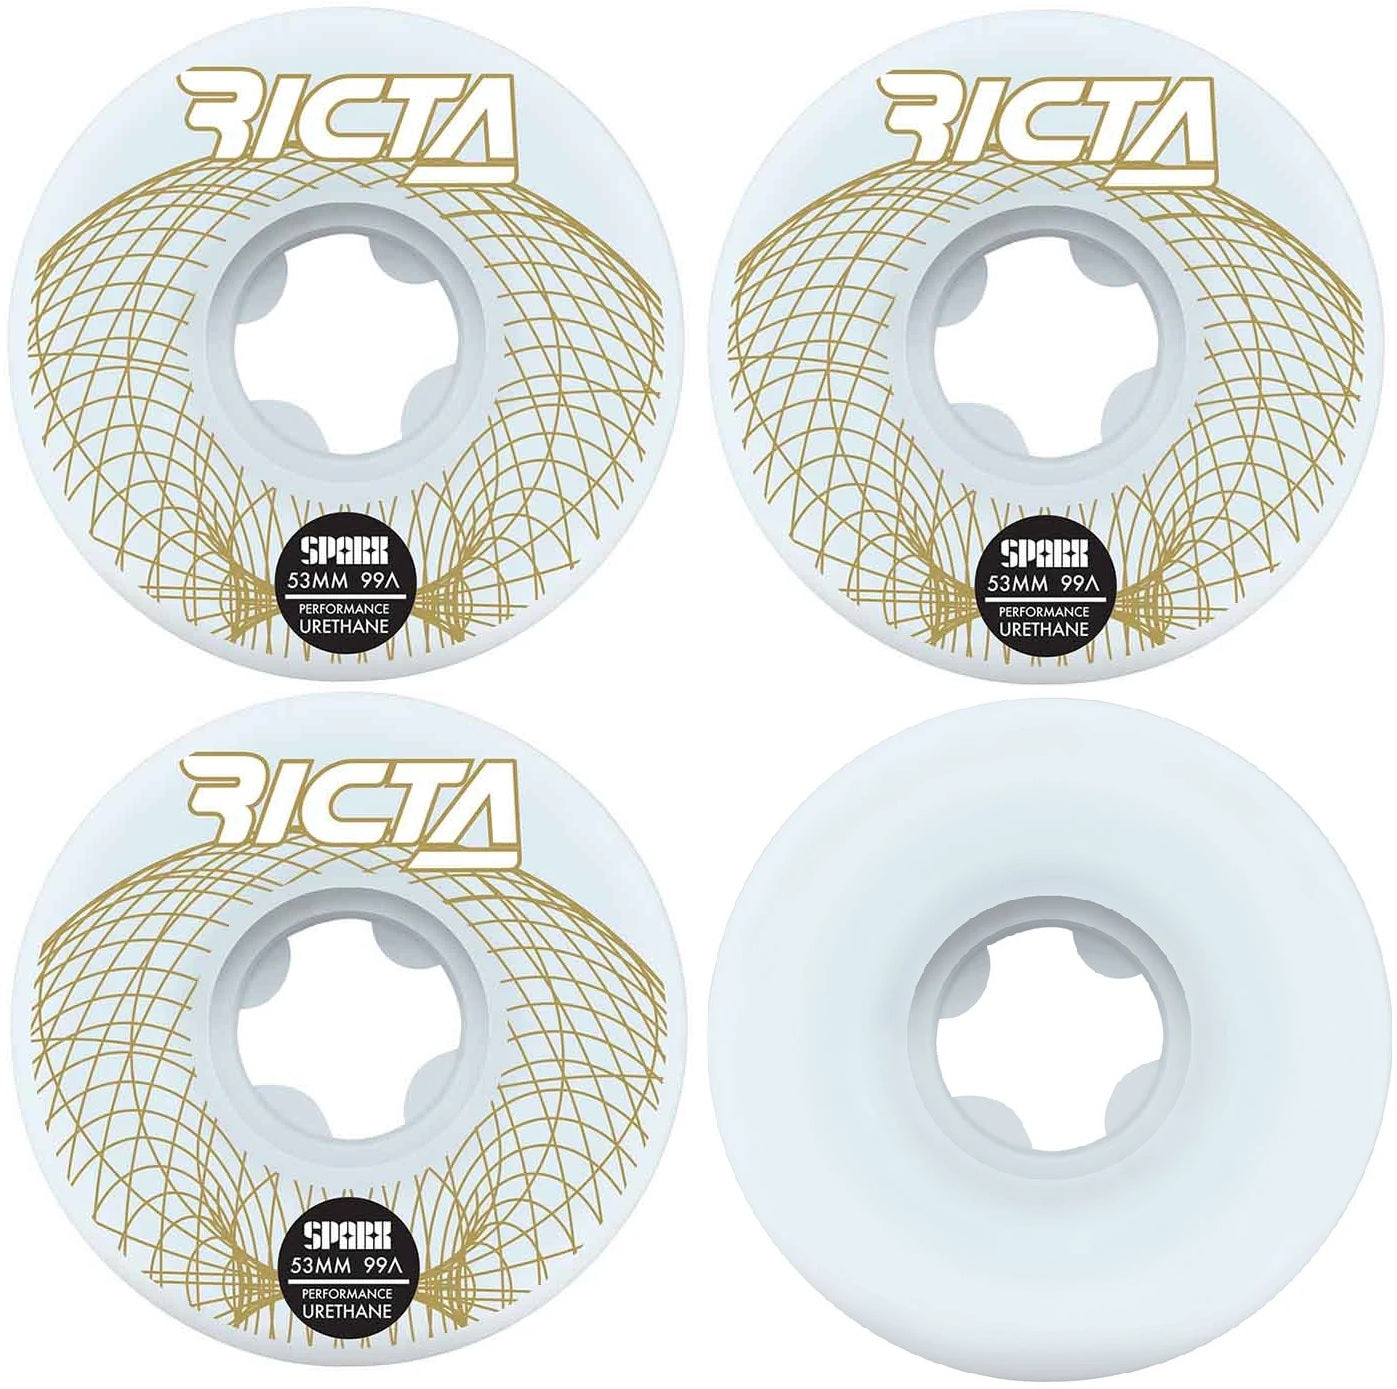 RICTA Wireframe Sparx Wheels 99A 53mm